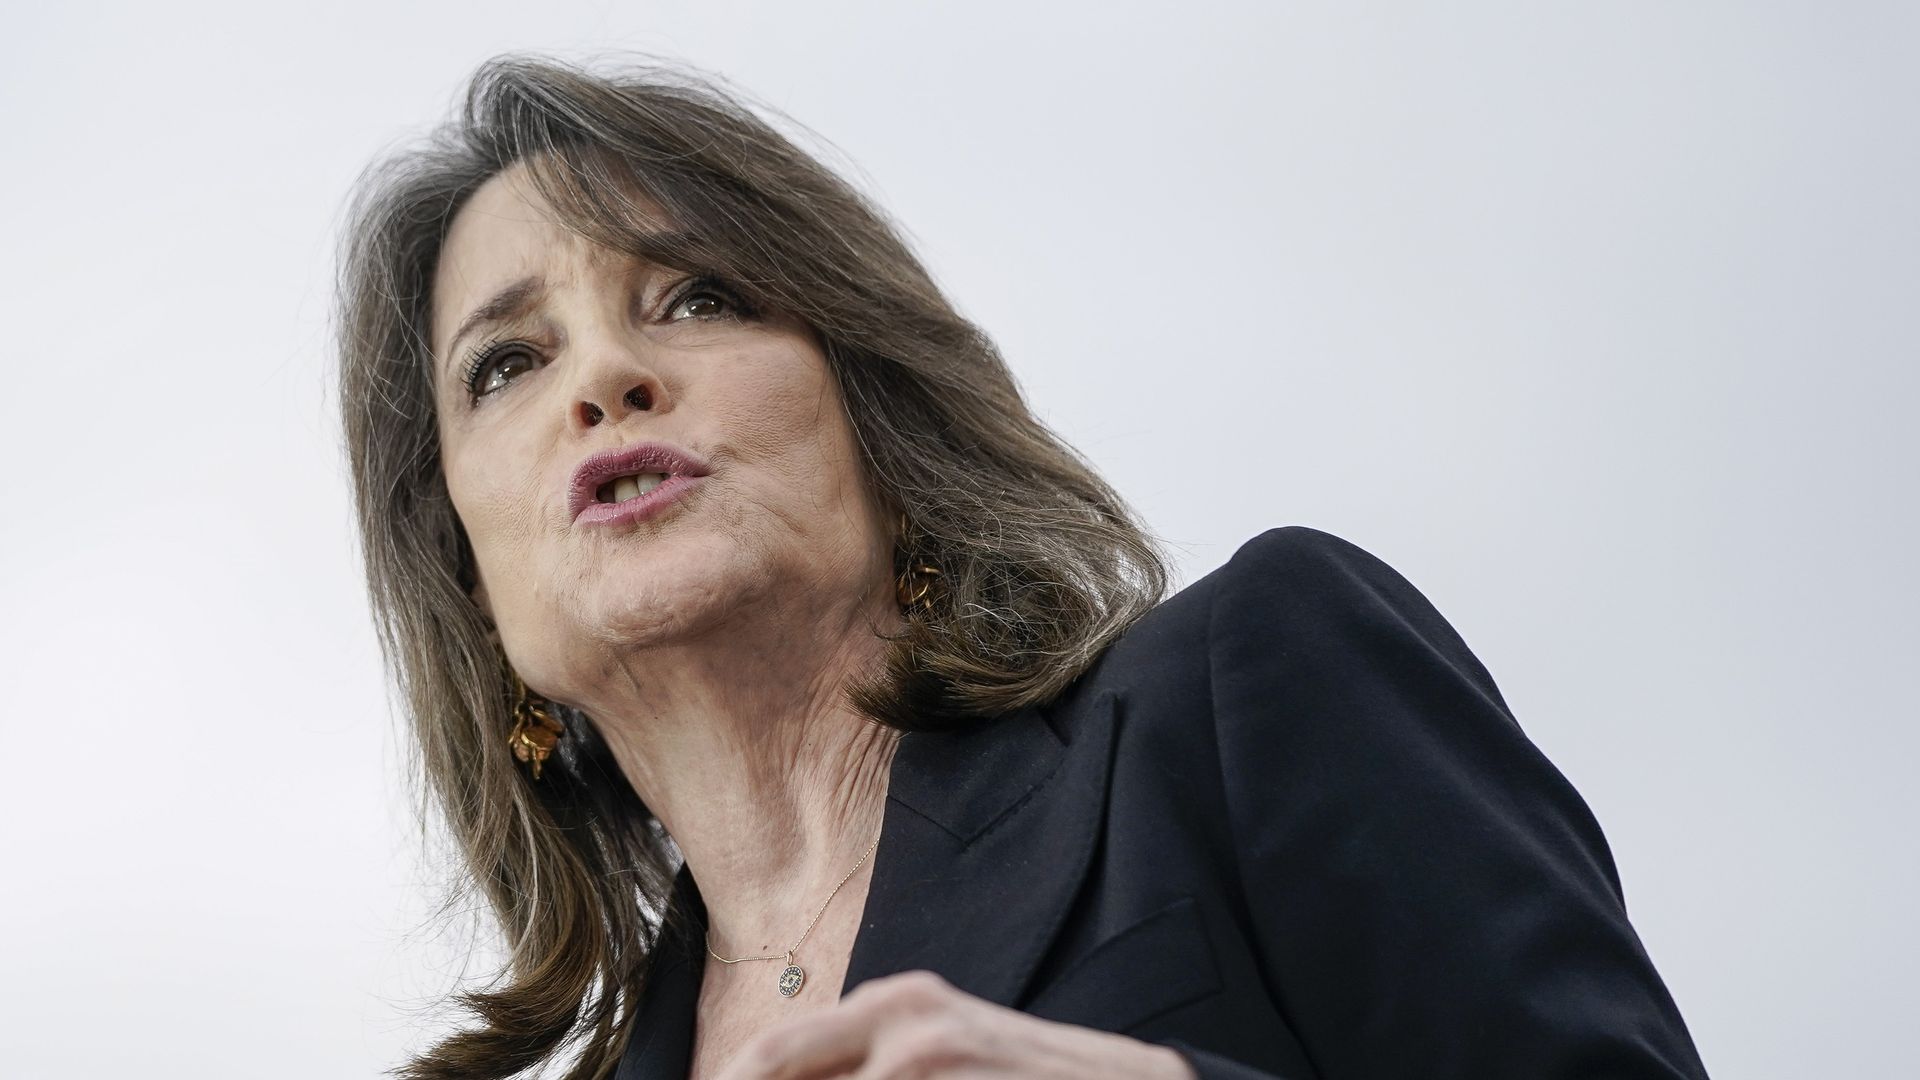  Marianne Williamson speaks as she endorses Democratic presidential candidate Sen. Bernie Sanders (I-VT) during a campaign rally at Vic Mathias Shores Park on February 23, 2020 in Austin, Texas. 